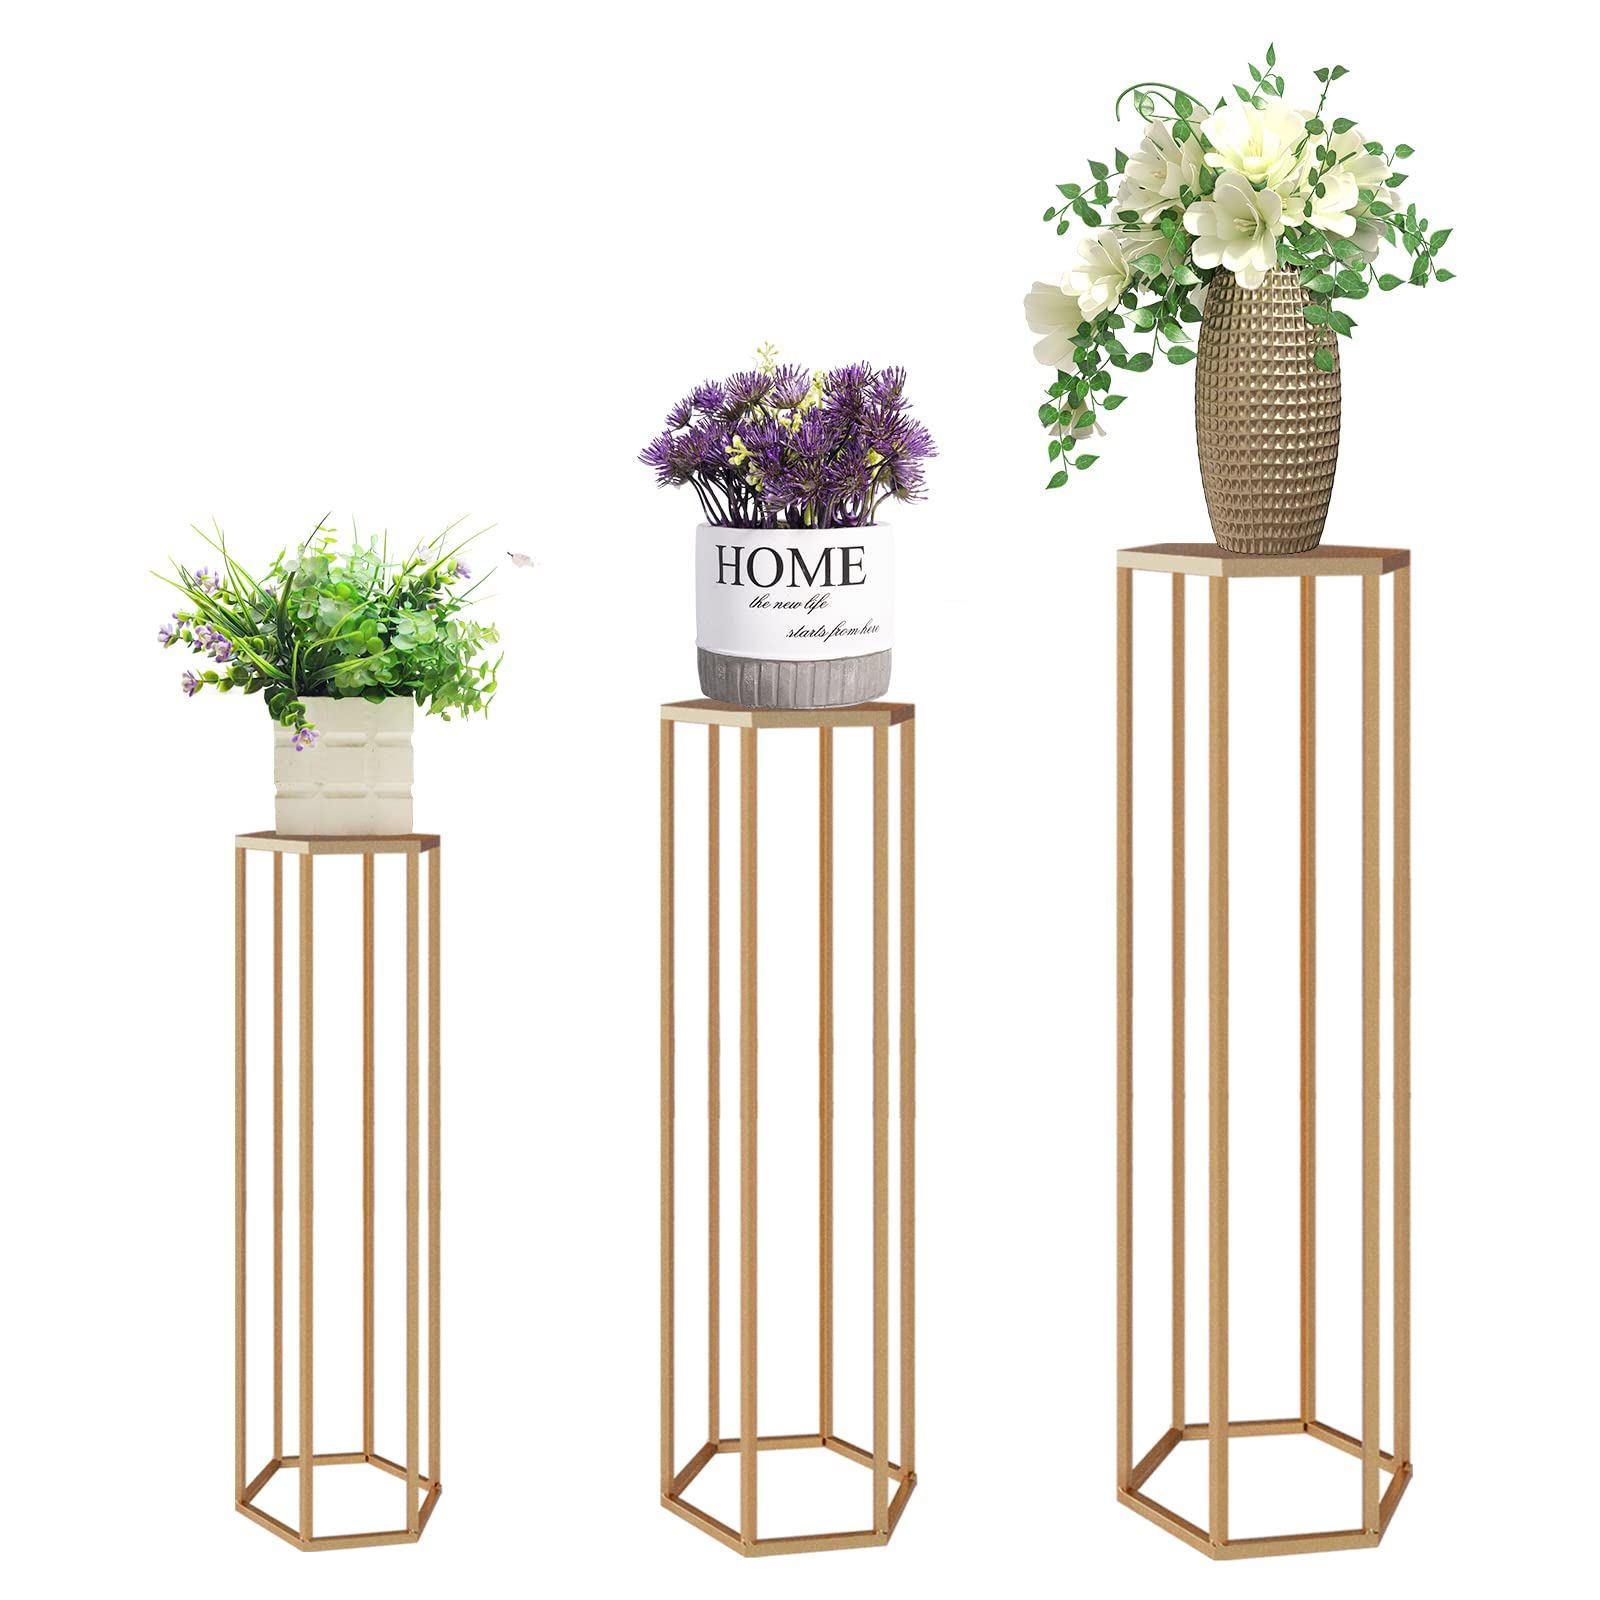 Mxfurhawa Plant Stand Set Of 3 Hexagon Metal Plant Shelf For Indoor And  Outdoor, Gold – Walmart With Regard To Hexagon Plant Stands (View 8 of 15)